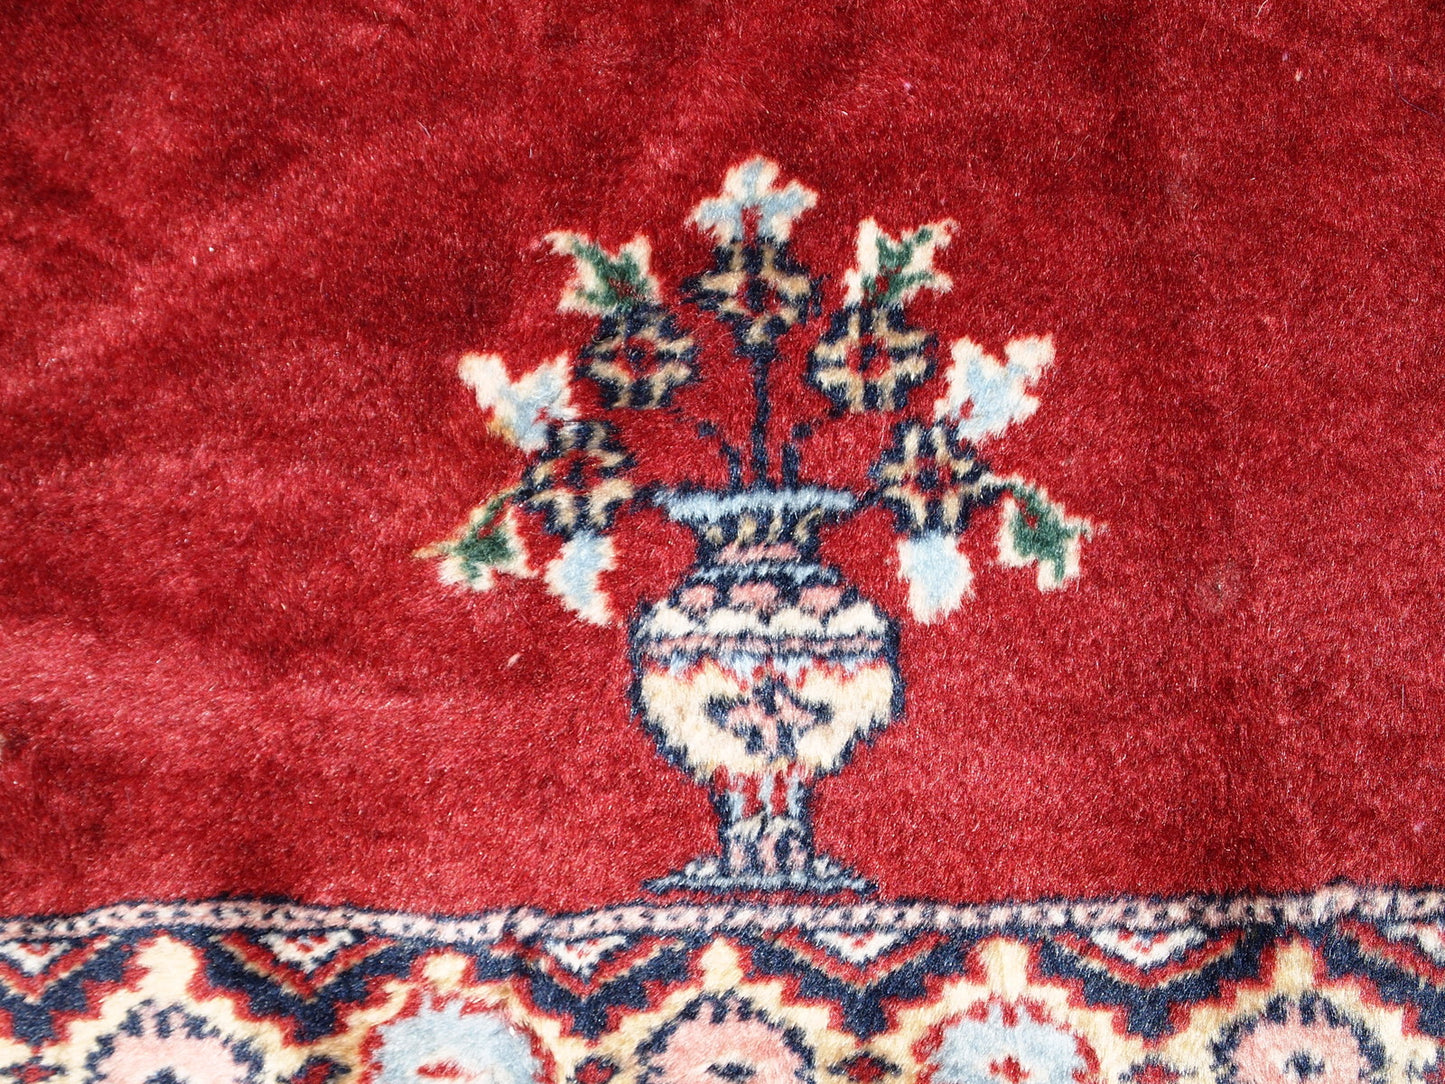 Handmade vintage Pakistani Lahore praying rug in original good condition, it has a little signs of age on one side. The rug is from the middle of 20th century in bright colors. The wool is shiny.